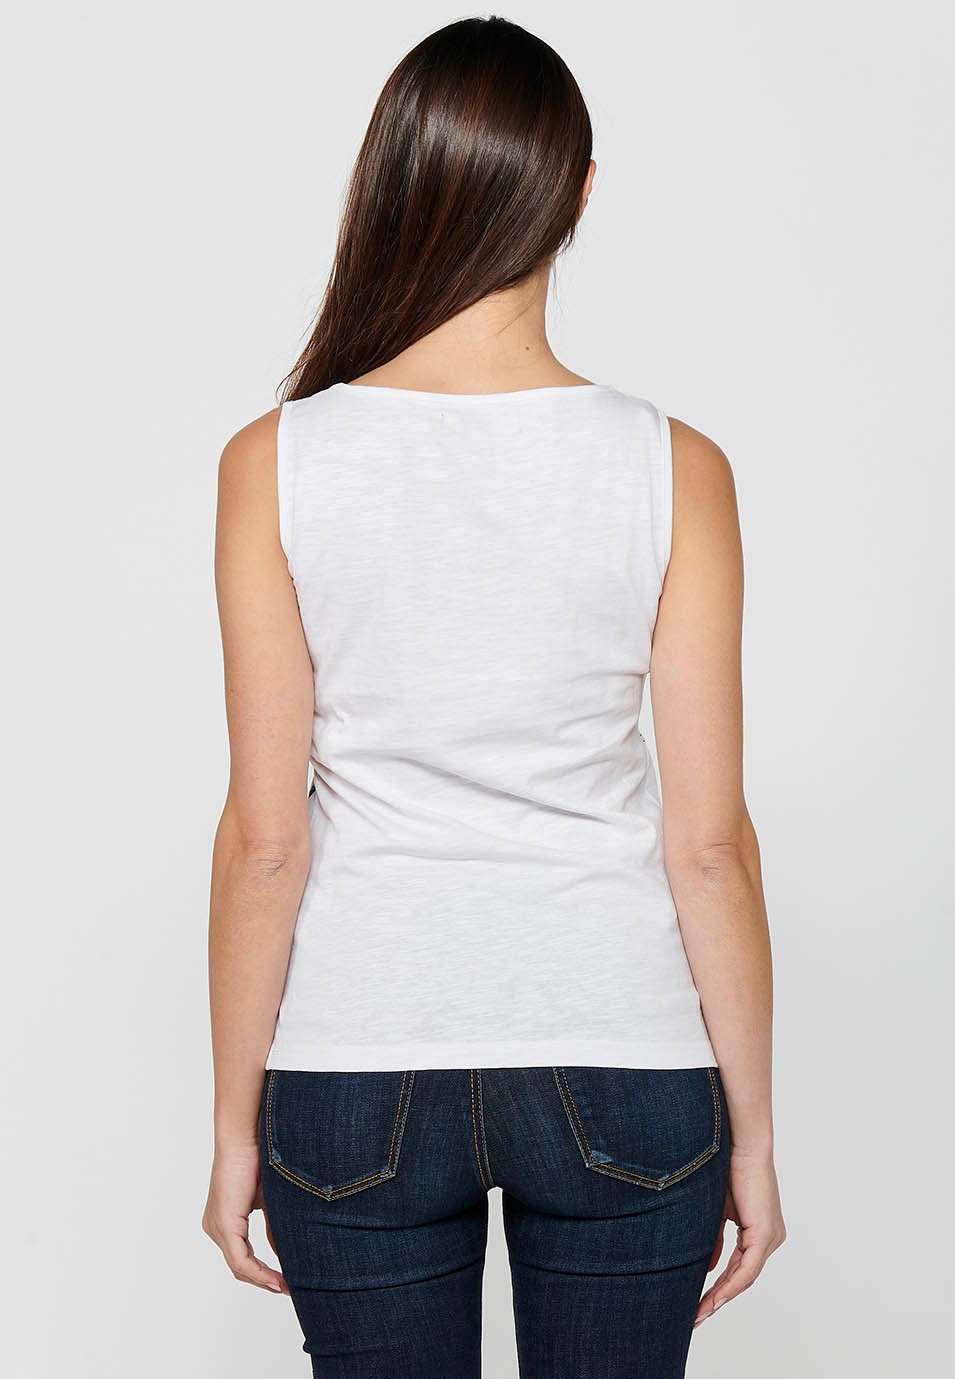 Sleeveless T-shirt with White Front Print for Women 3